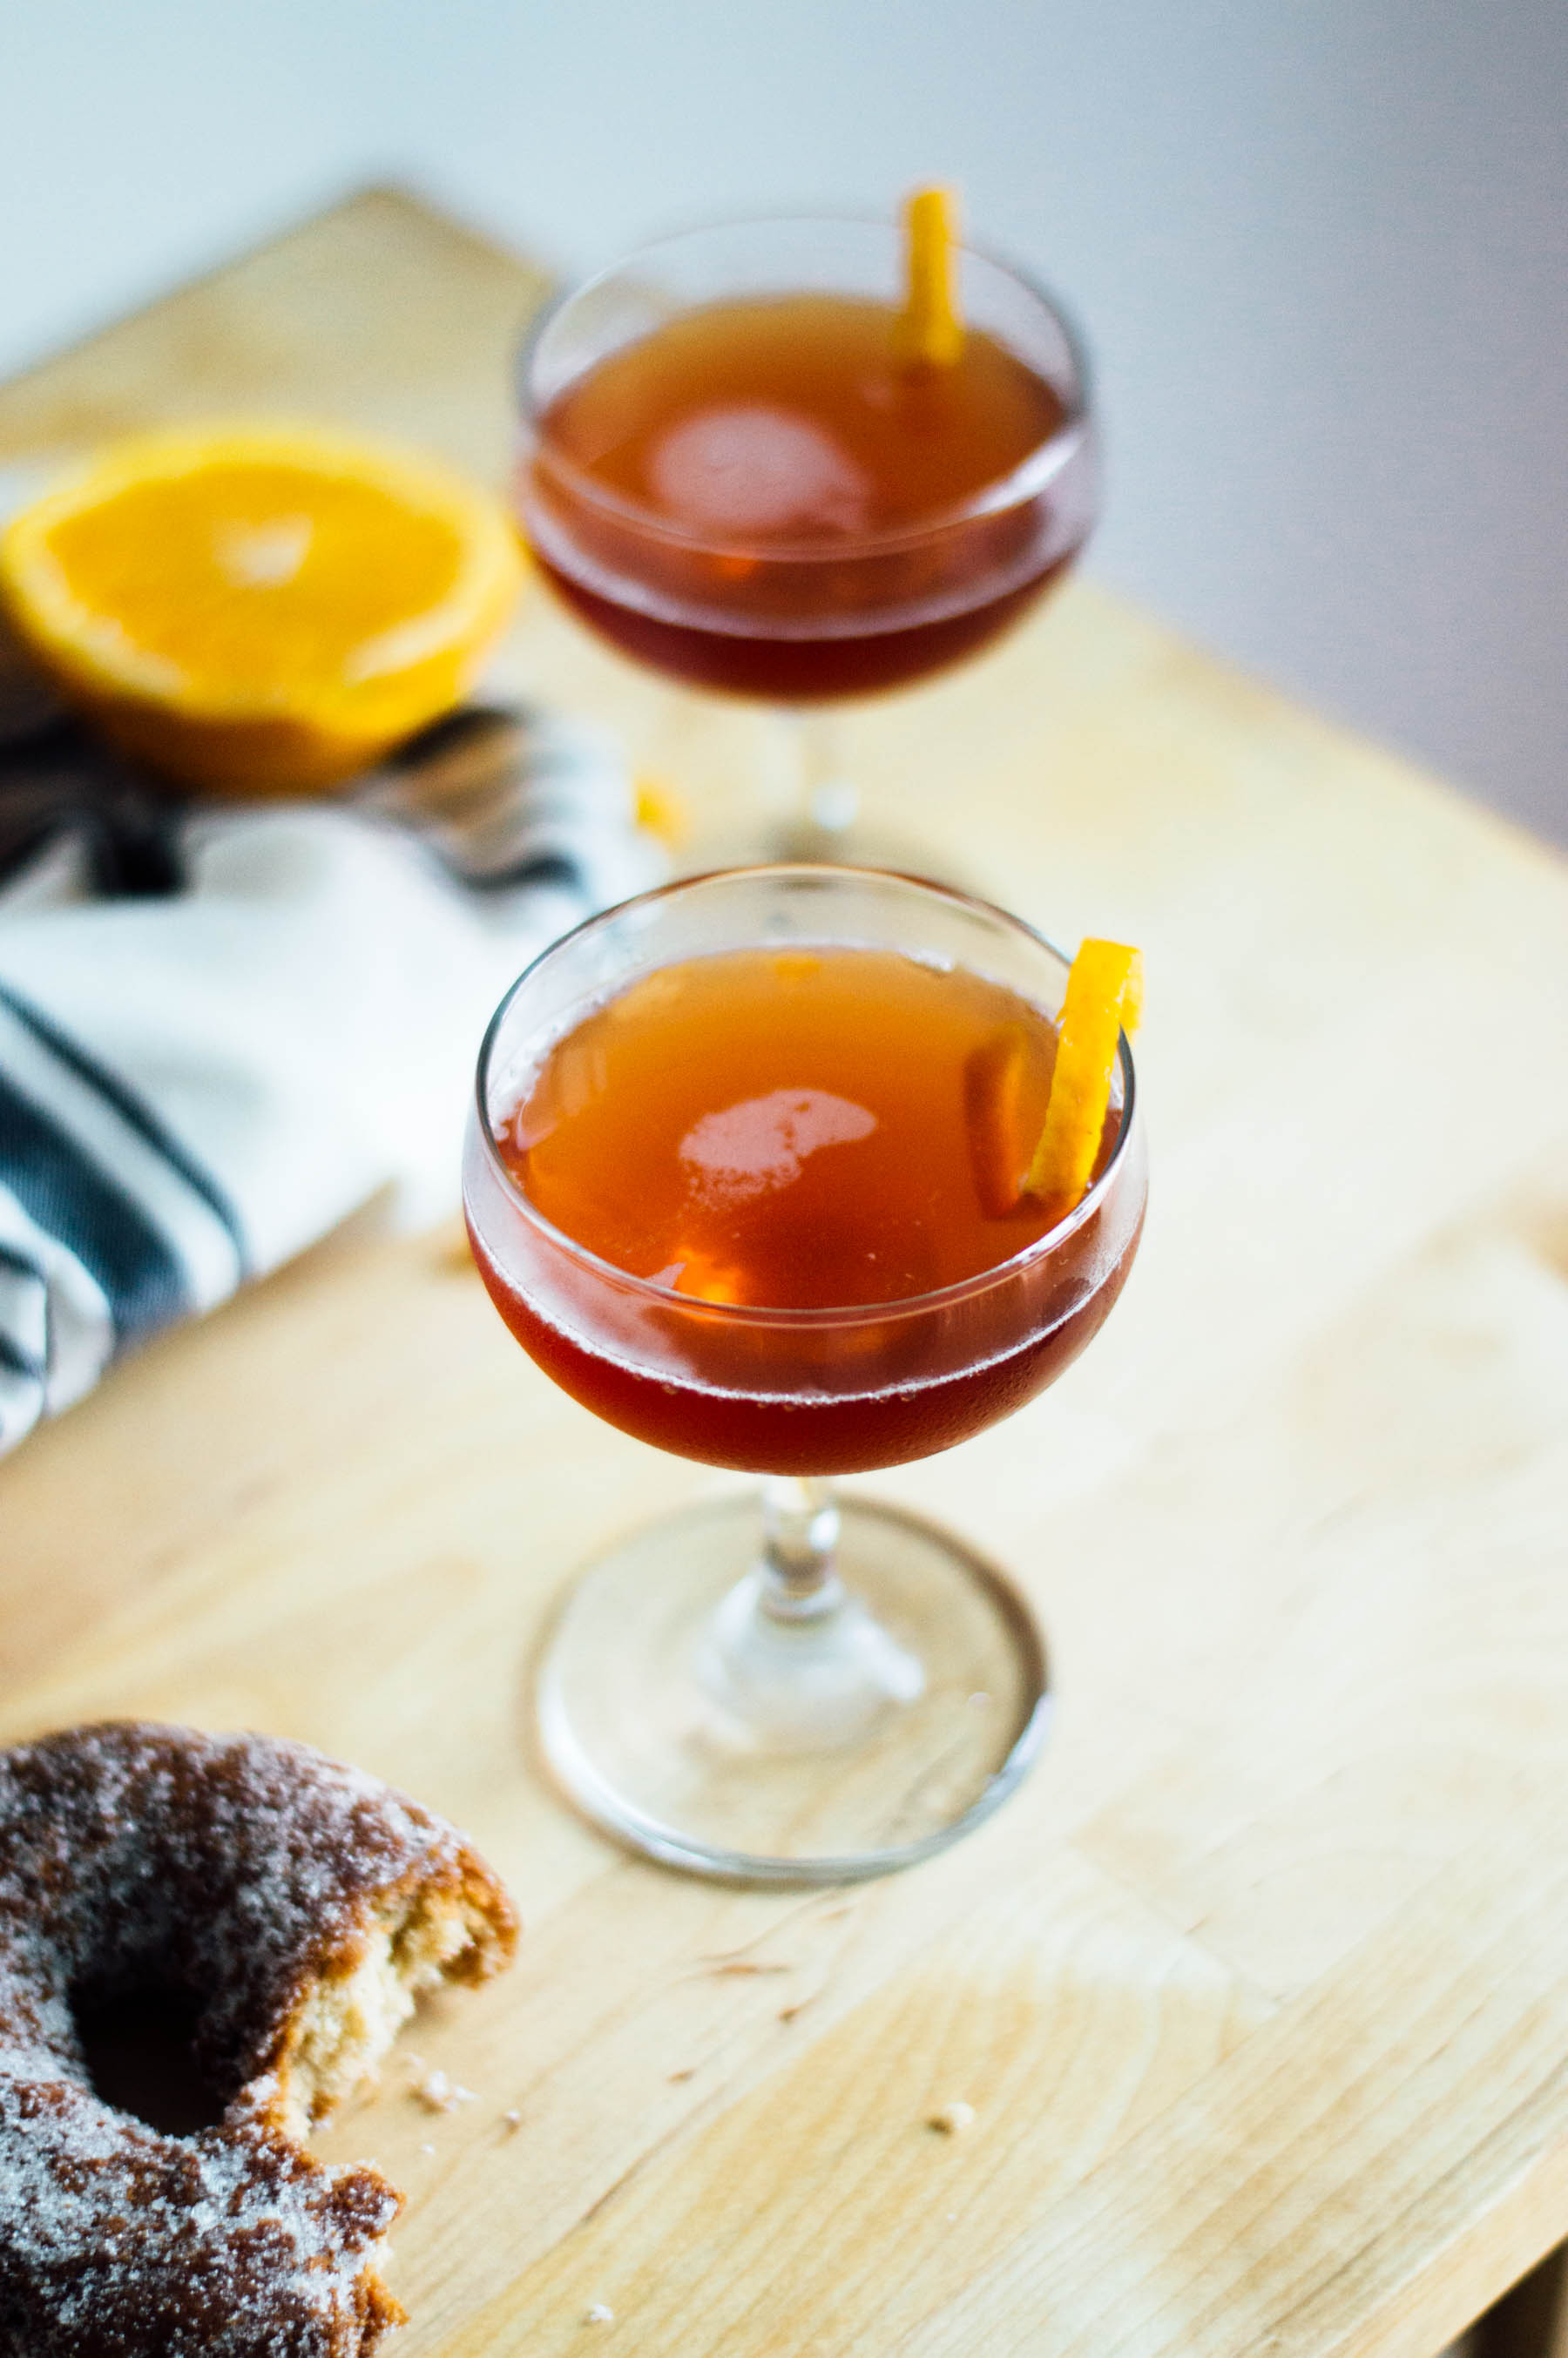 Whip up the Jack Rose Cocktail recipe with just 3 ingredients and about 2 minutes of your time! | bygabriella.co